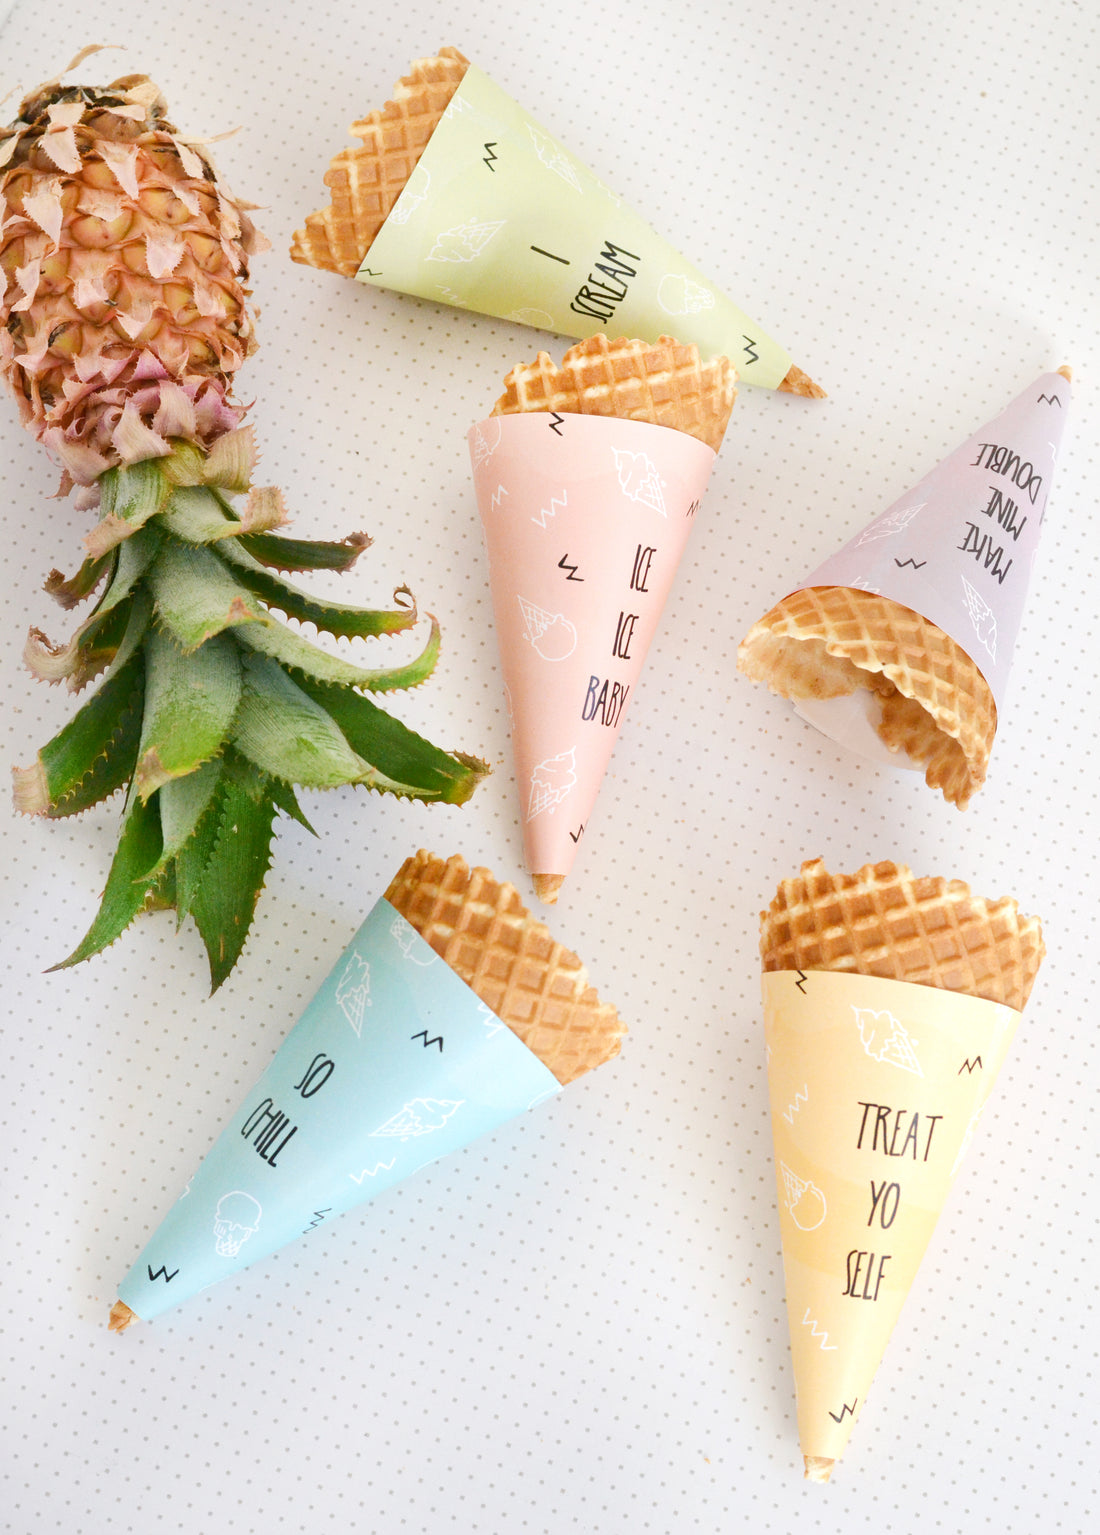 Printable ice cream cone wrappers for Delineate your Dwelling